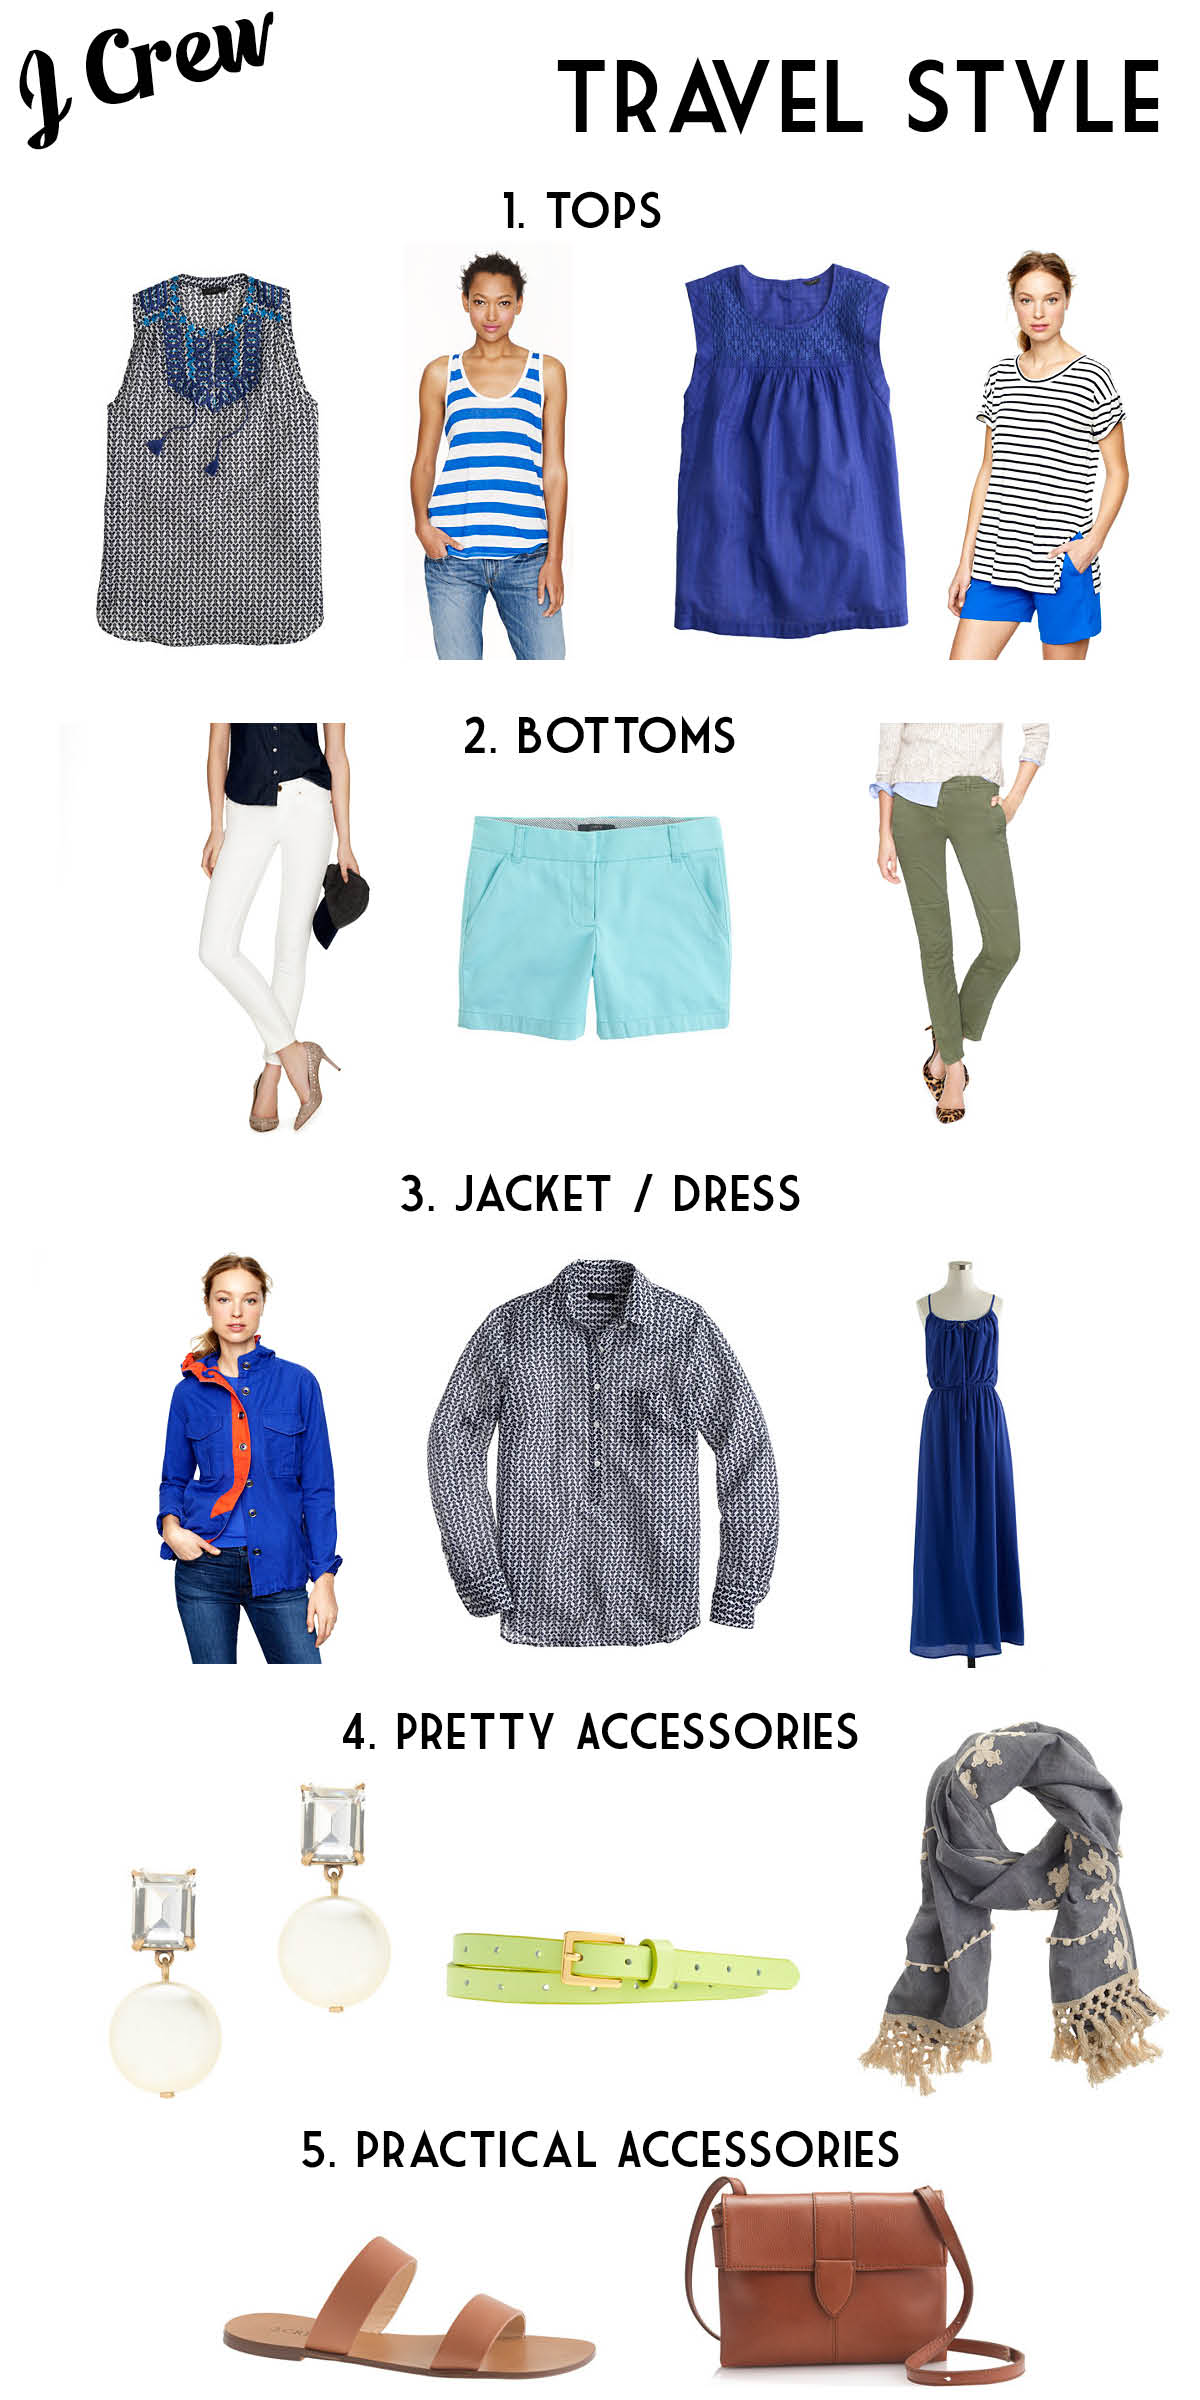 Travel Style from J. Crew on A Few of My Favorite Things